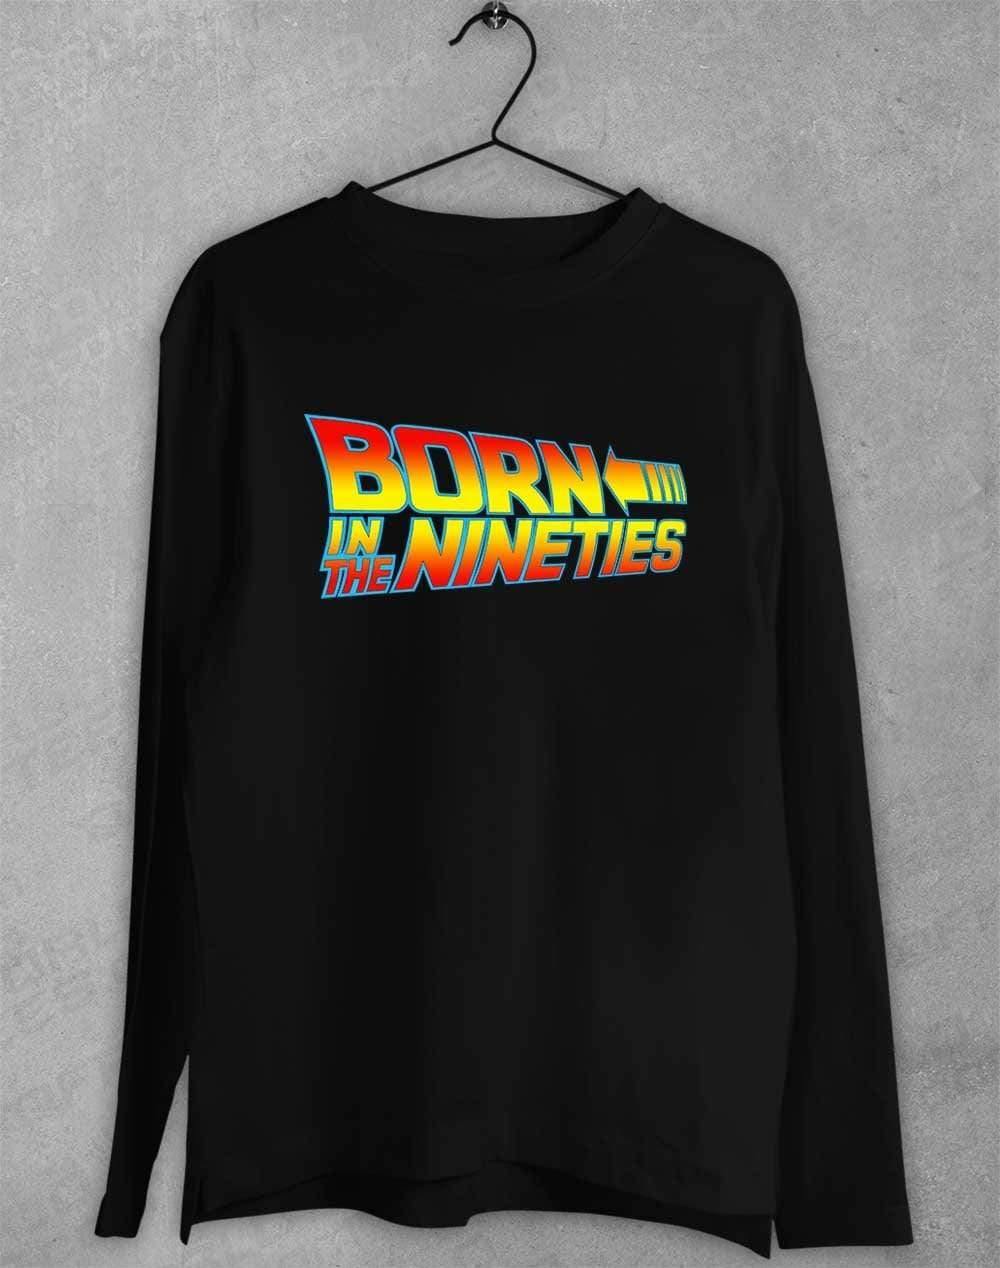 Born in the... (CHOOSE YOUR DECADE!) Long Sleeve T-Shirt 1990s - Black / S  - Off World Tees